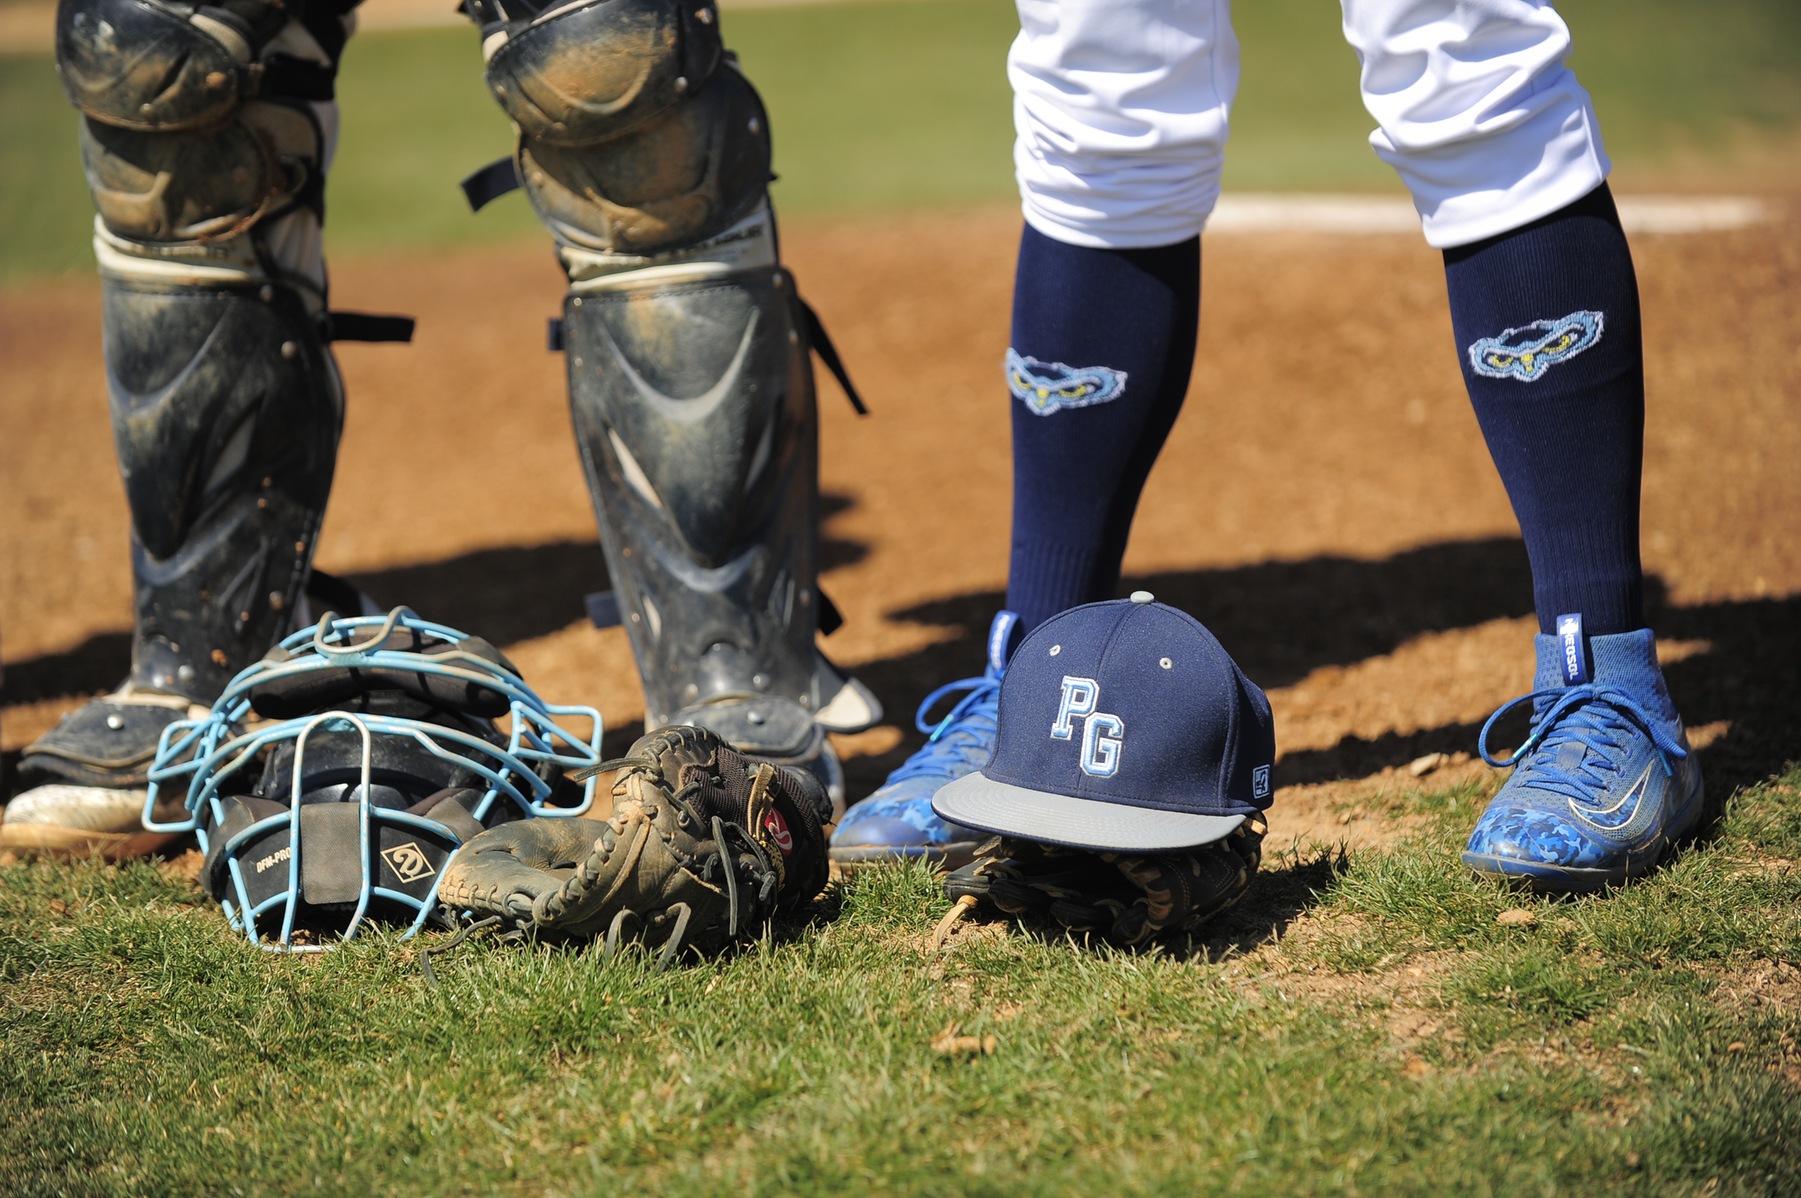 Moving On Up: Prince George's Baseball Slides Into Eighth Spot In NJCAA Division III Baseball Rankings